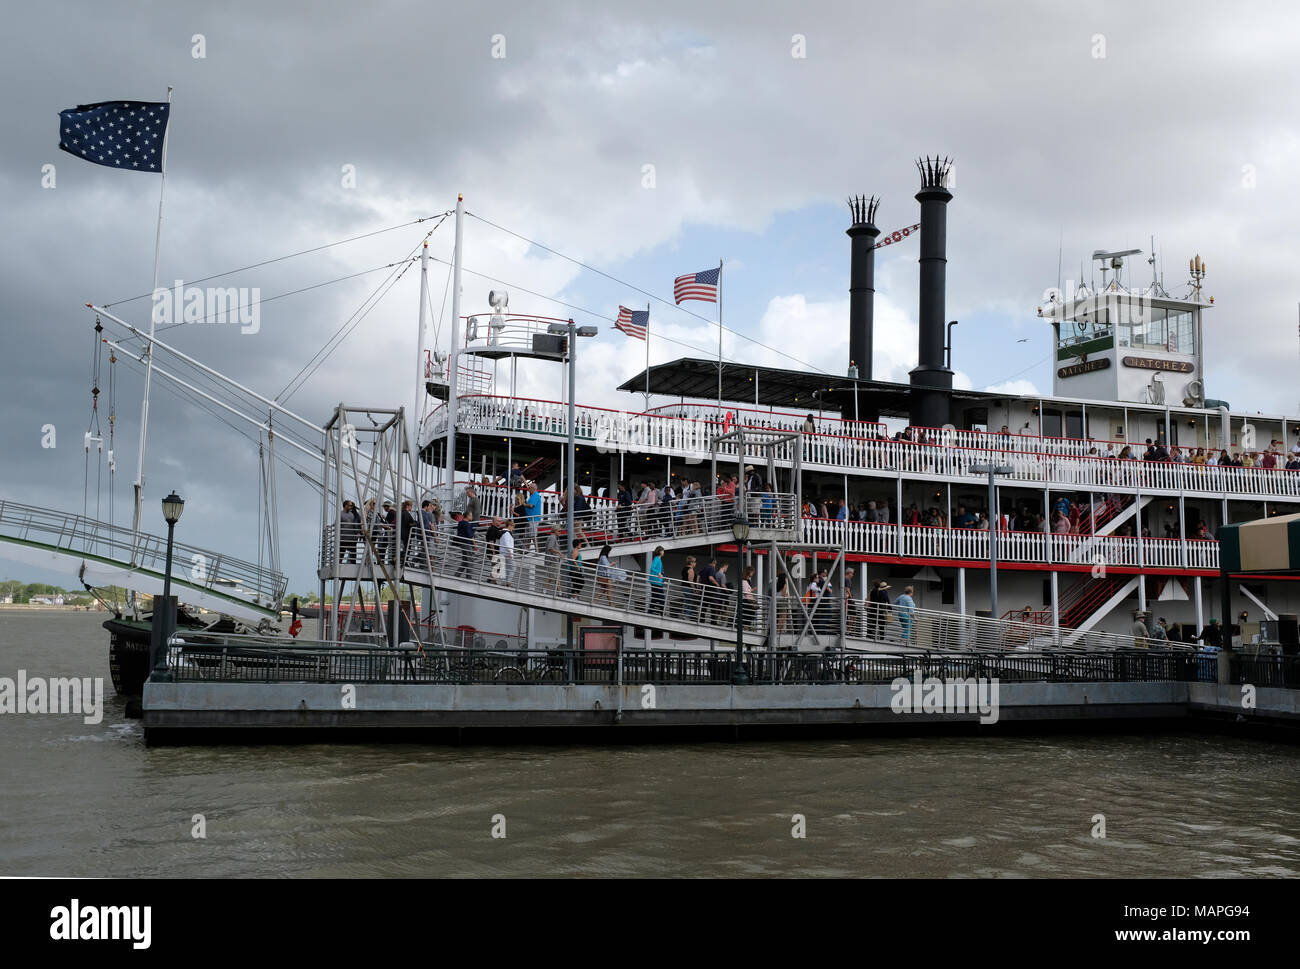 The Natchez, Steamboat unloading passengers on the Mississippi, in New Orleans, Louisiana Stock Photo